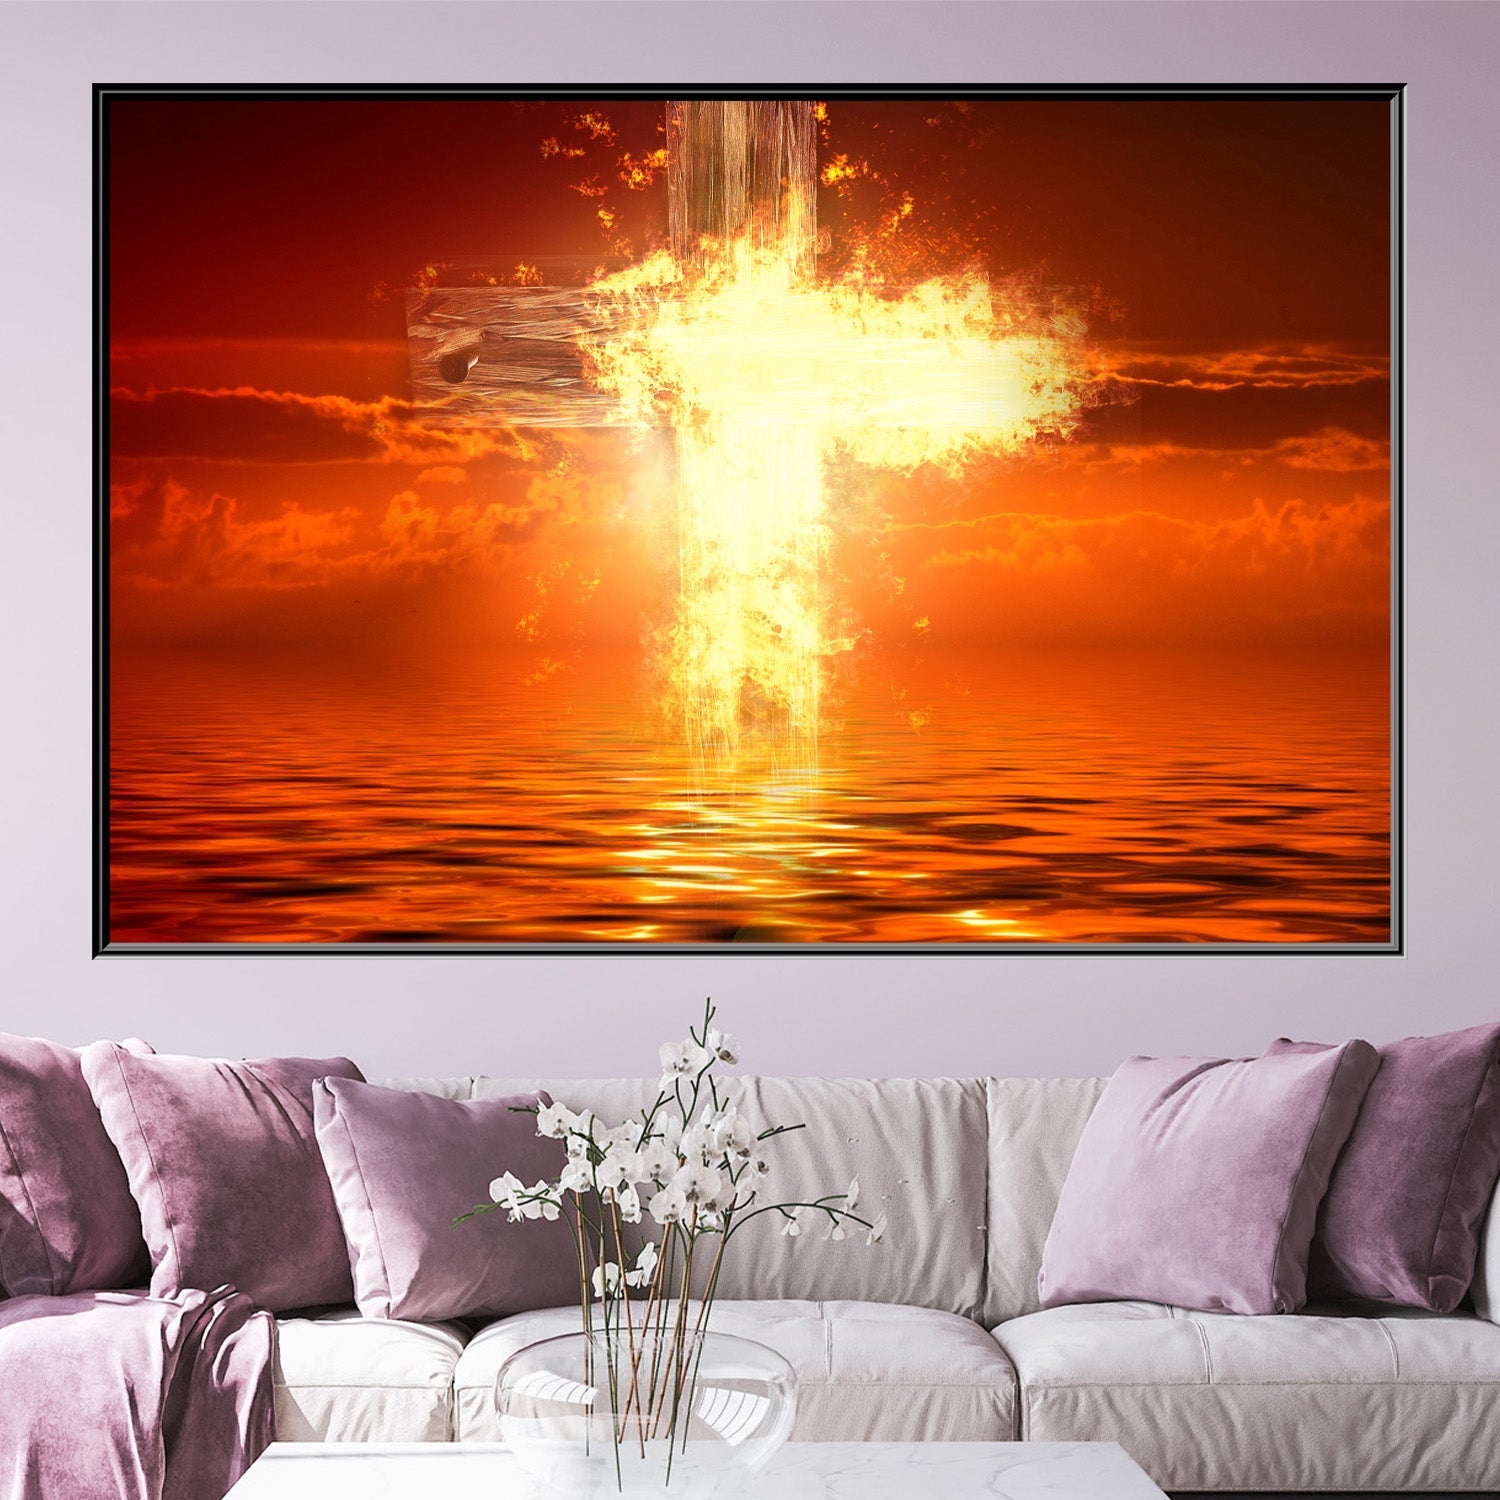 https://cdn.shopify.com/s/files/1/0387/9986/8044/products/FlamingCrossonWaterCanvasArtprintStretched-2.jpg